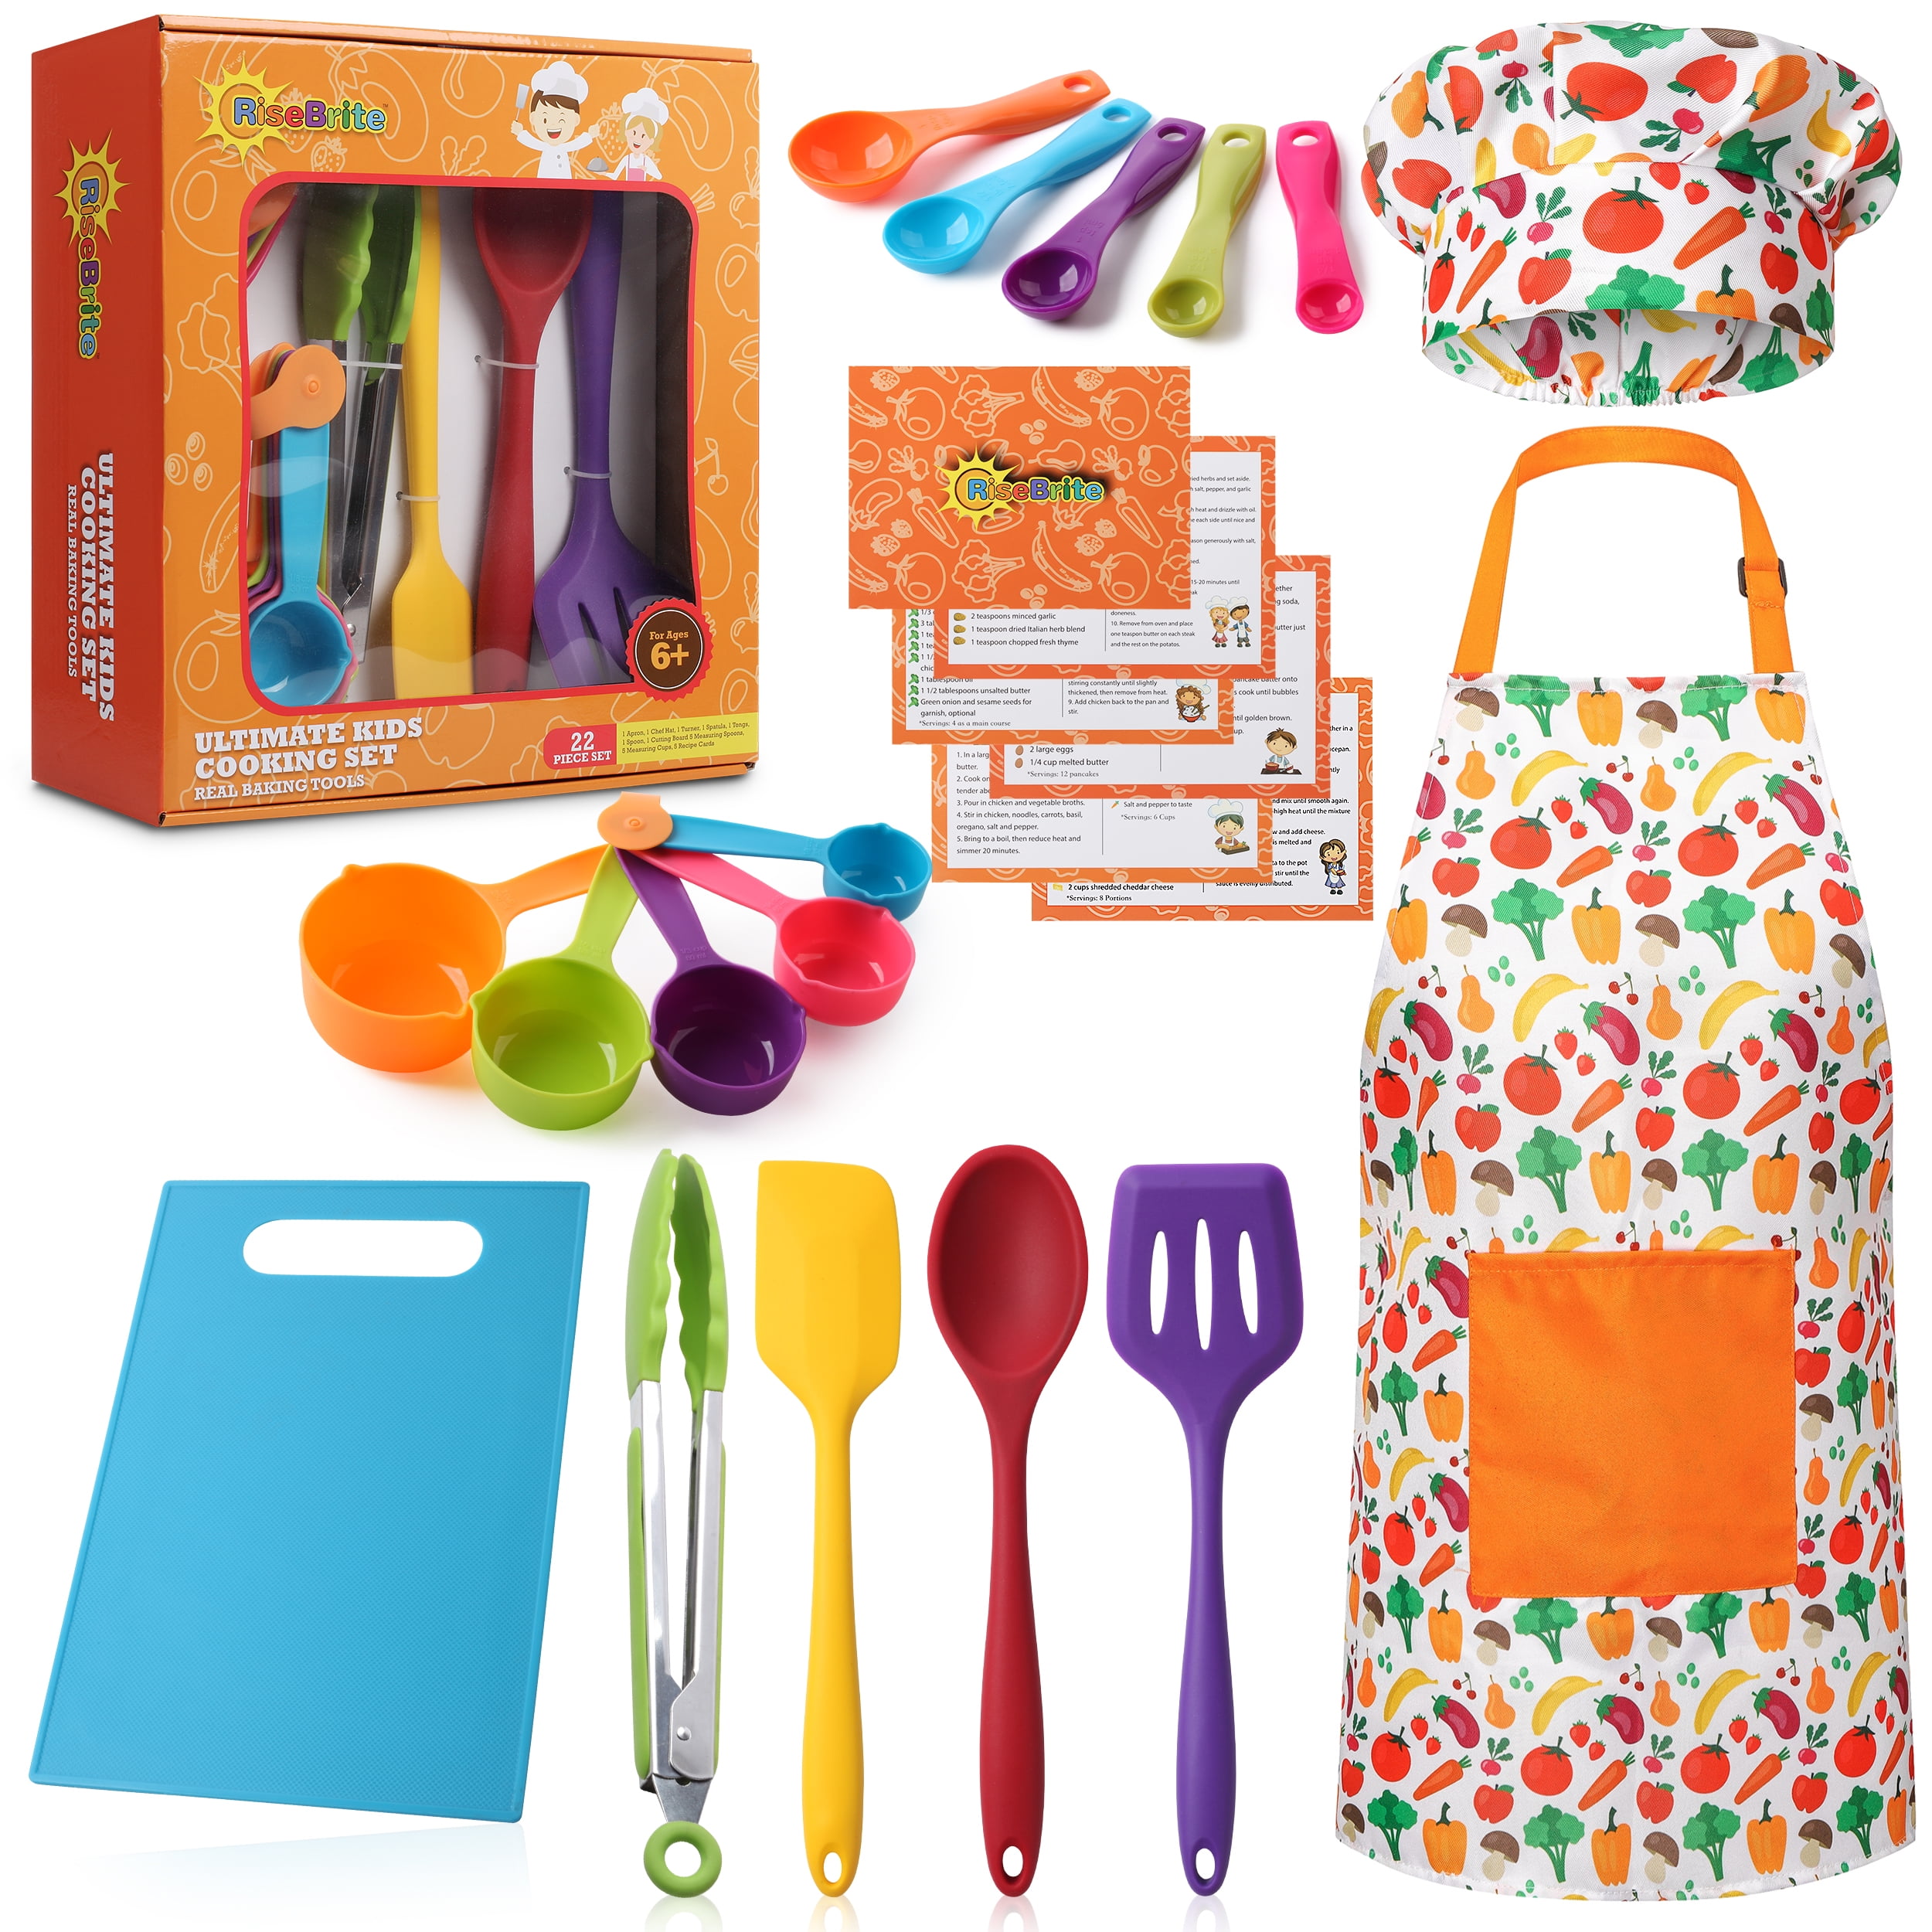 Creative Challenges for Kids to Explore Cooking Skills Safe 1 Apron and 3 Cooking Challenge Recipes Ages 8+ MindWare Playful Chef Master Series Cooking Challenge Kit Includes 22 Kitchen Tools 